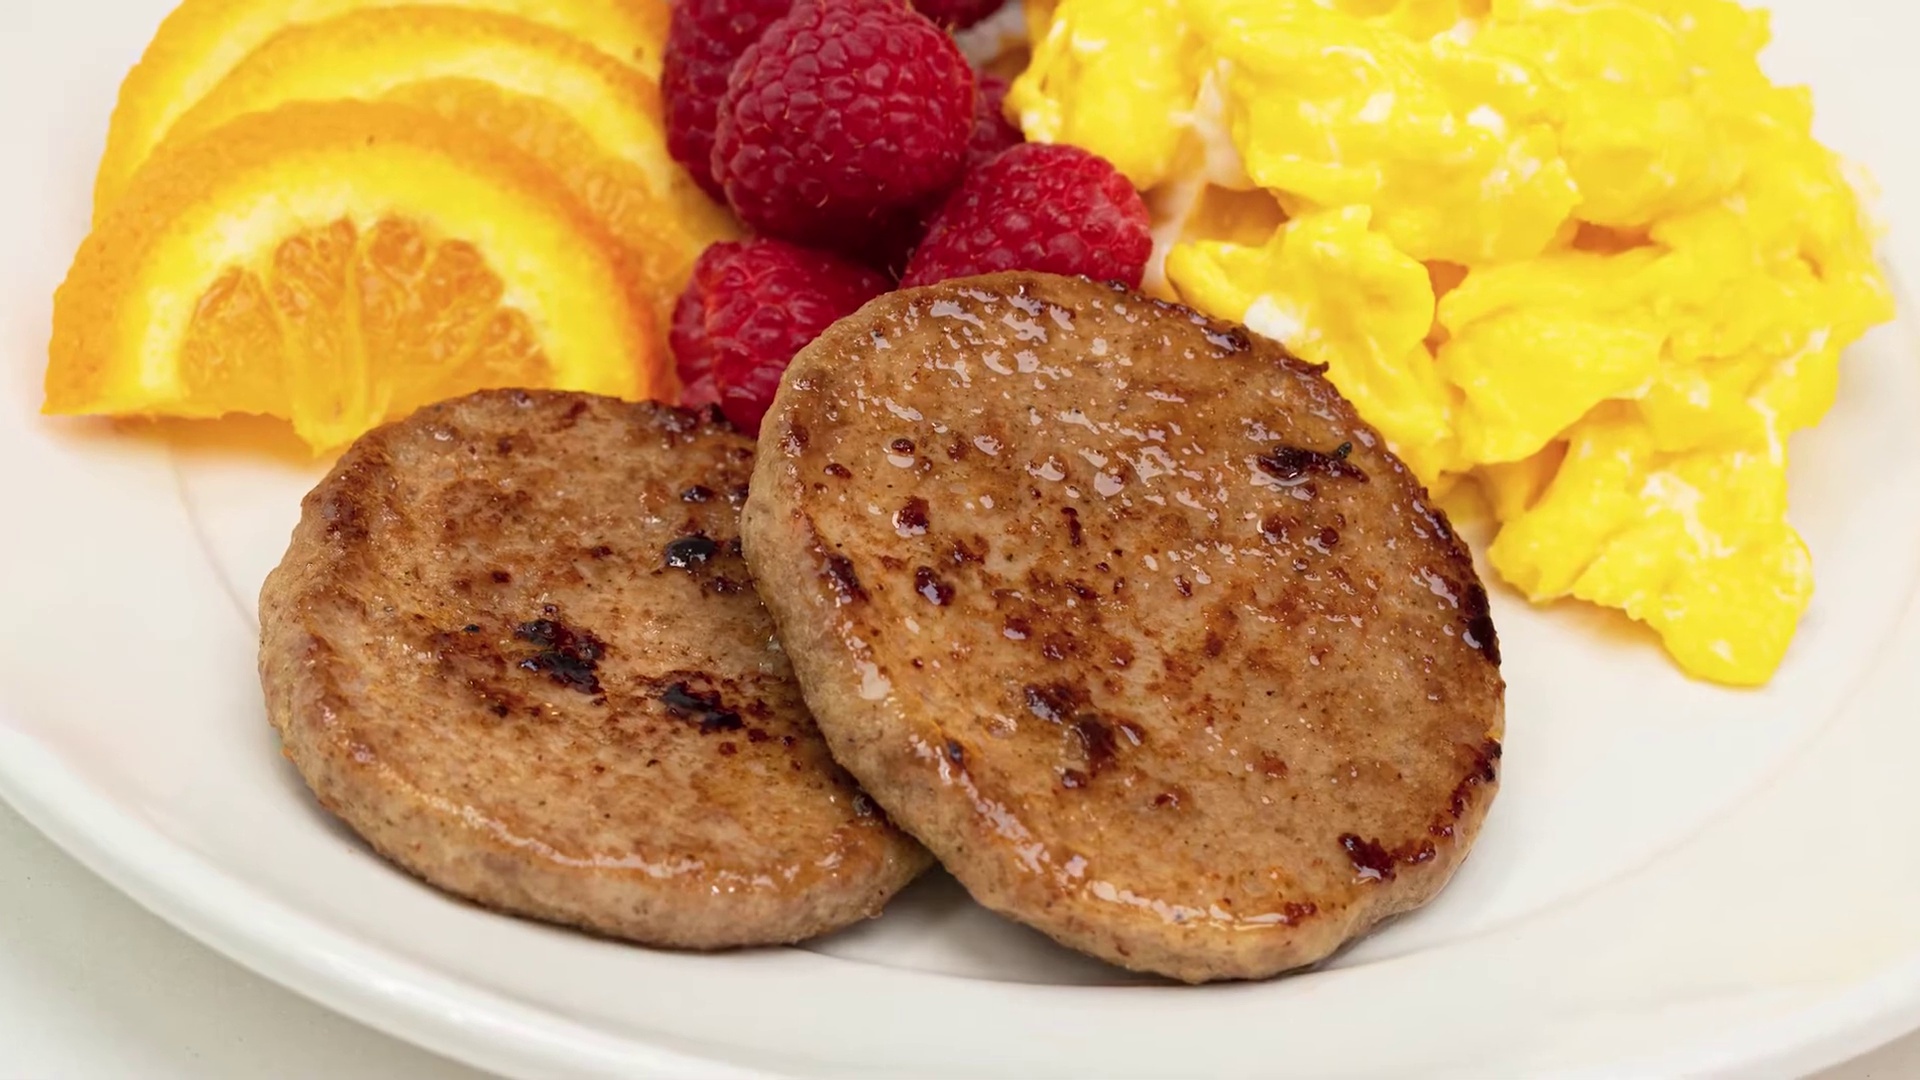 Turkey sausage rounds with scrambled eggs on plate